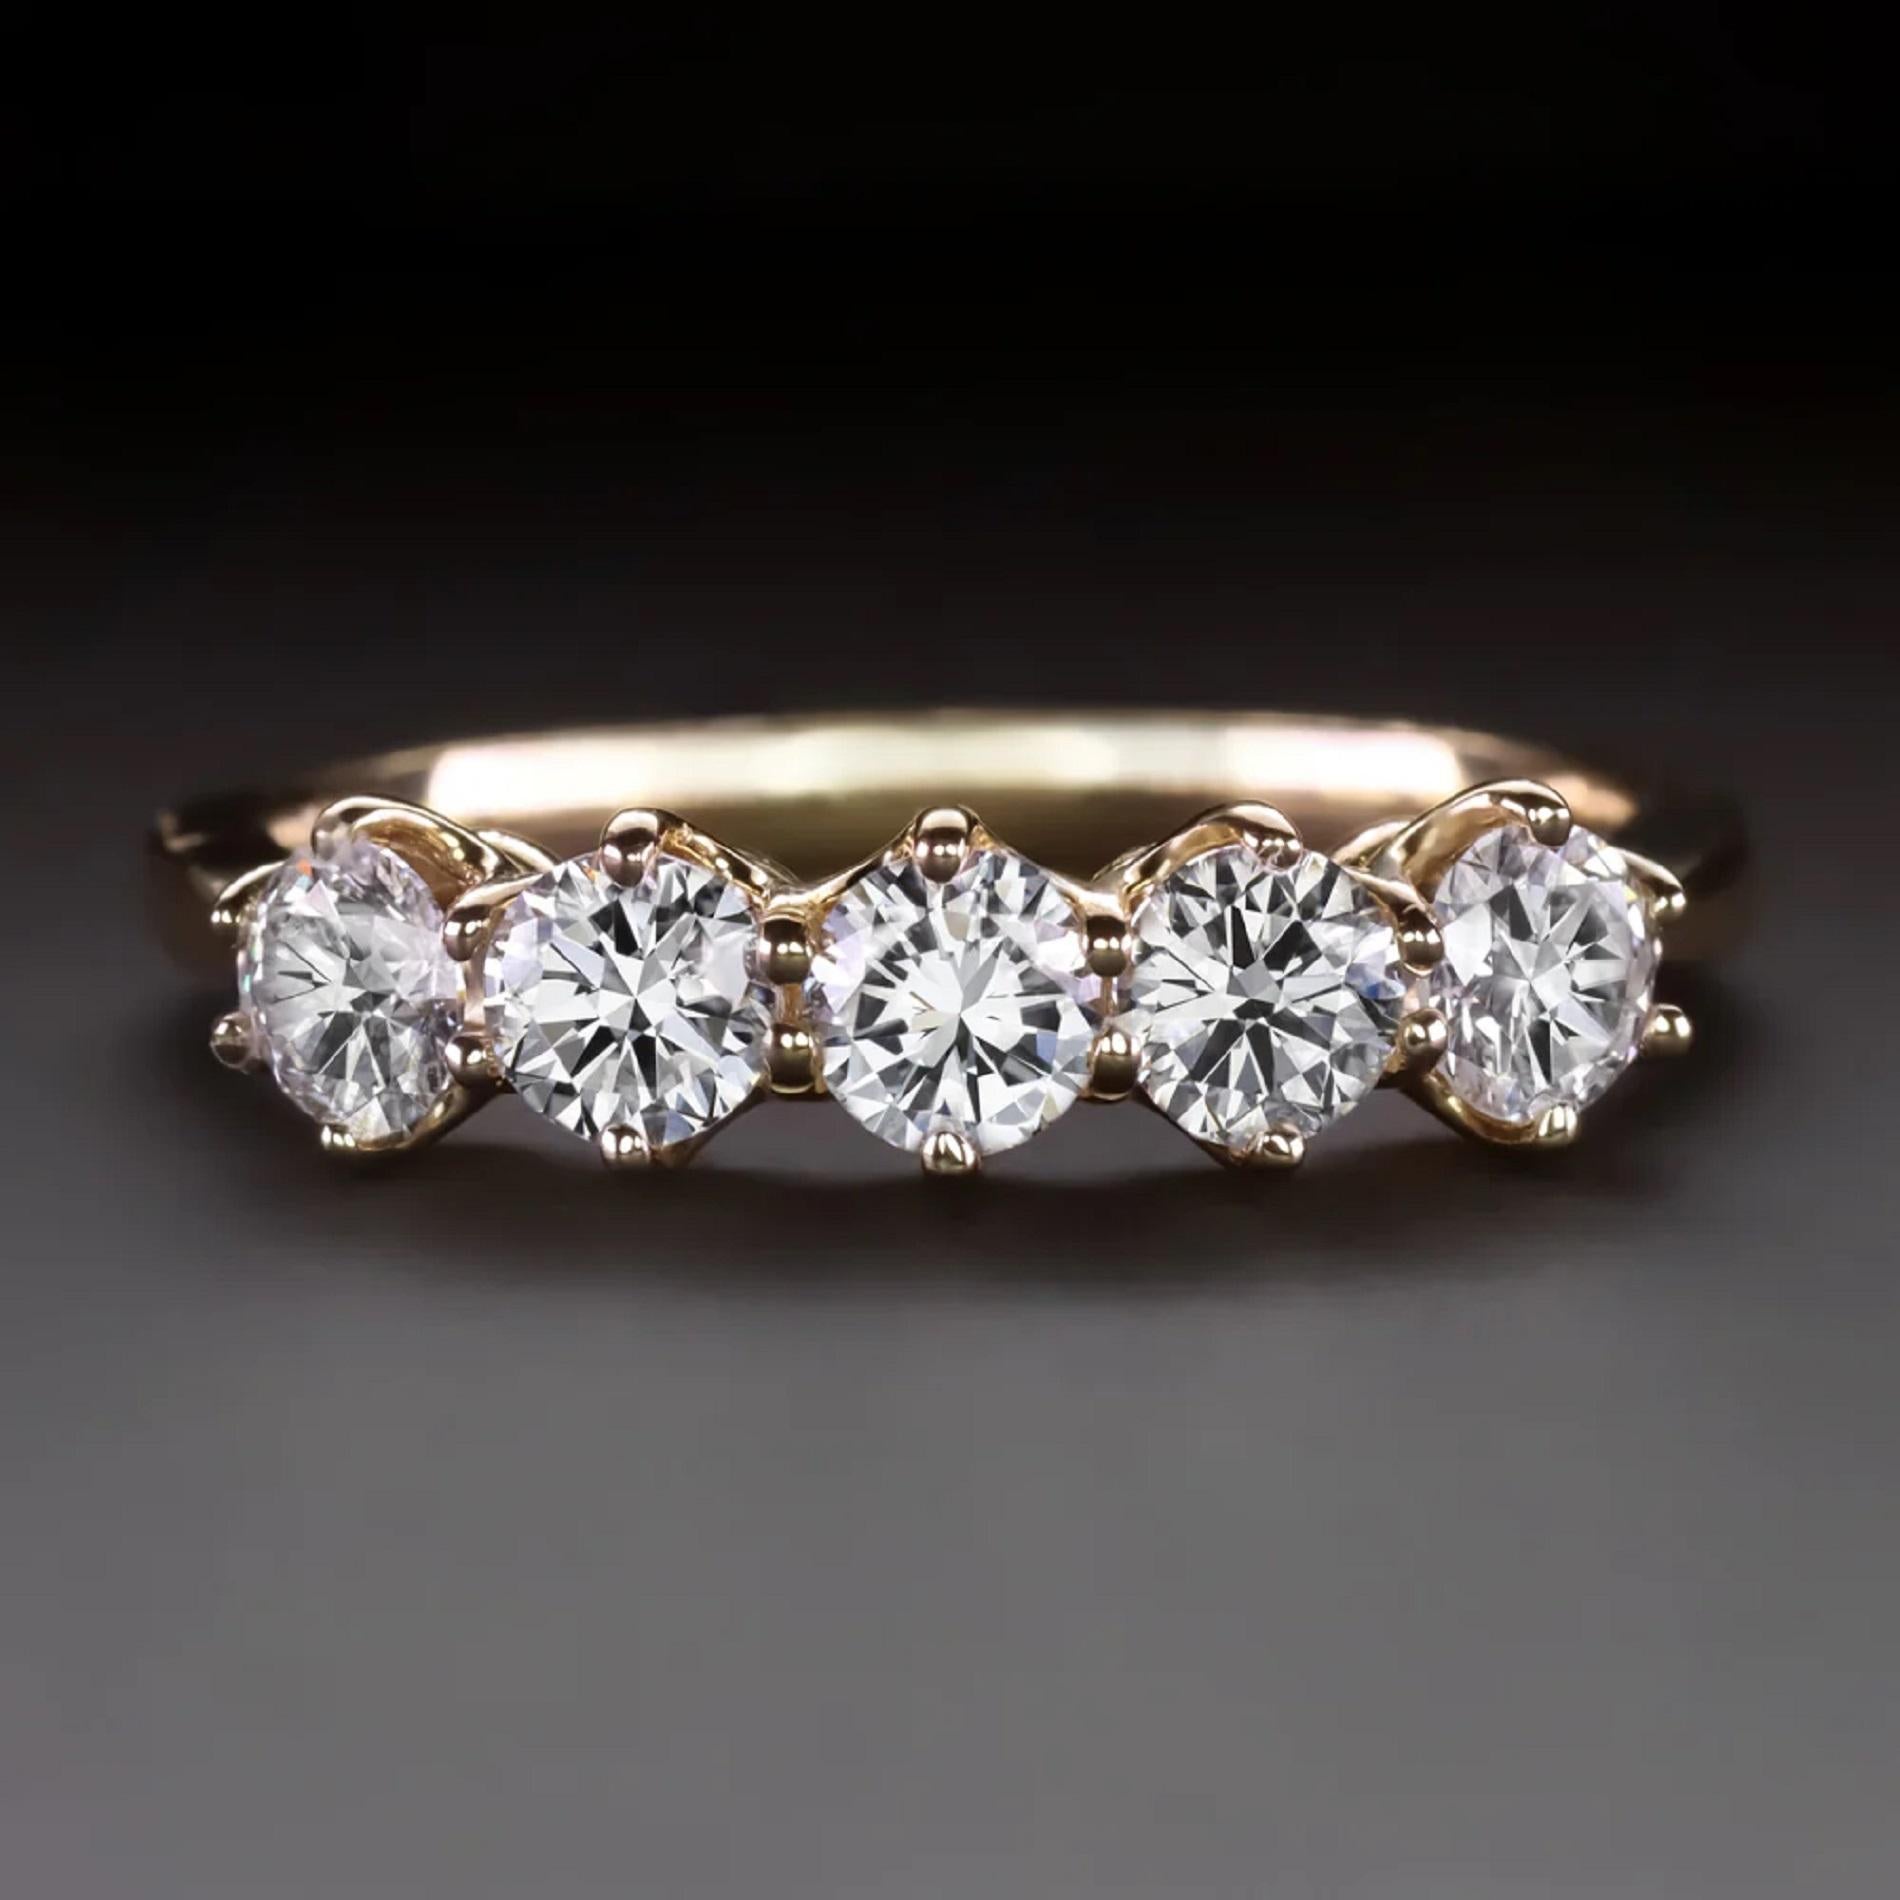 5 stone diamond band features 1 carat of glittering diamonds set in a classic 14k yellow gold design. The Victorian style buttercup settings add a touch of vintage charm and romance while maintaining a timeless aesthetic!

Highlights:

- Totaling 1